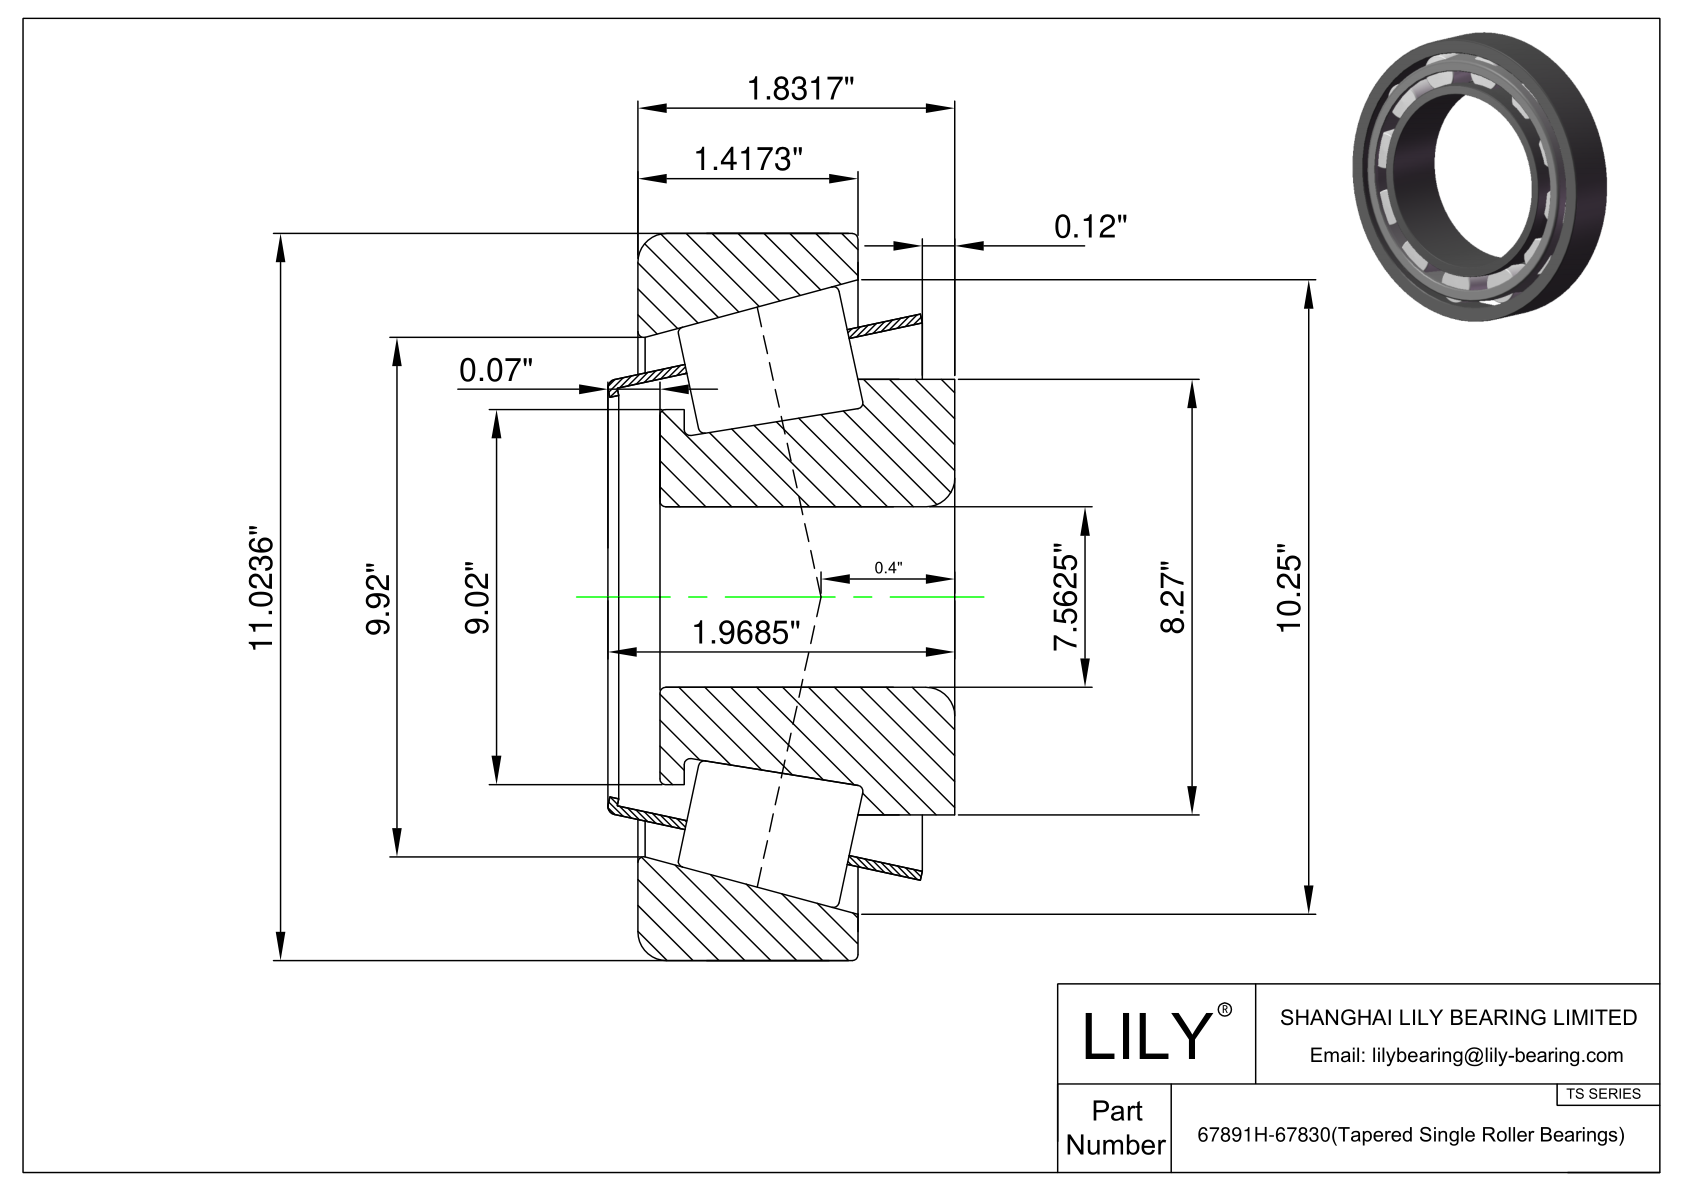 67891H-67830 TS (Tapered Single Roller Bearings) (Imperial) cad drawing